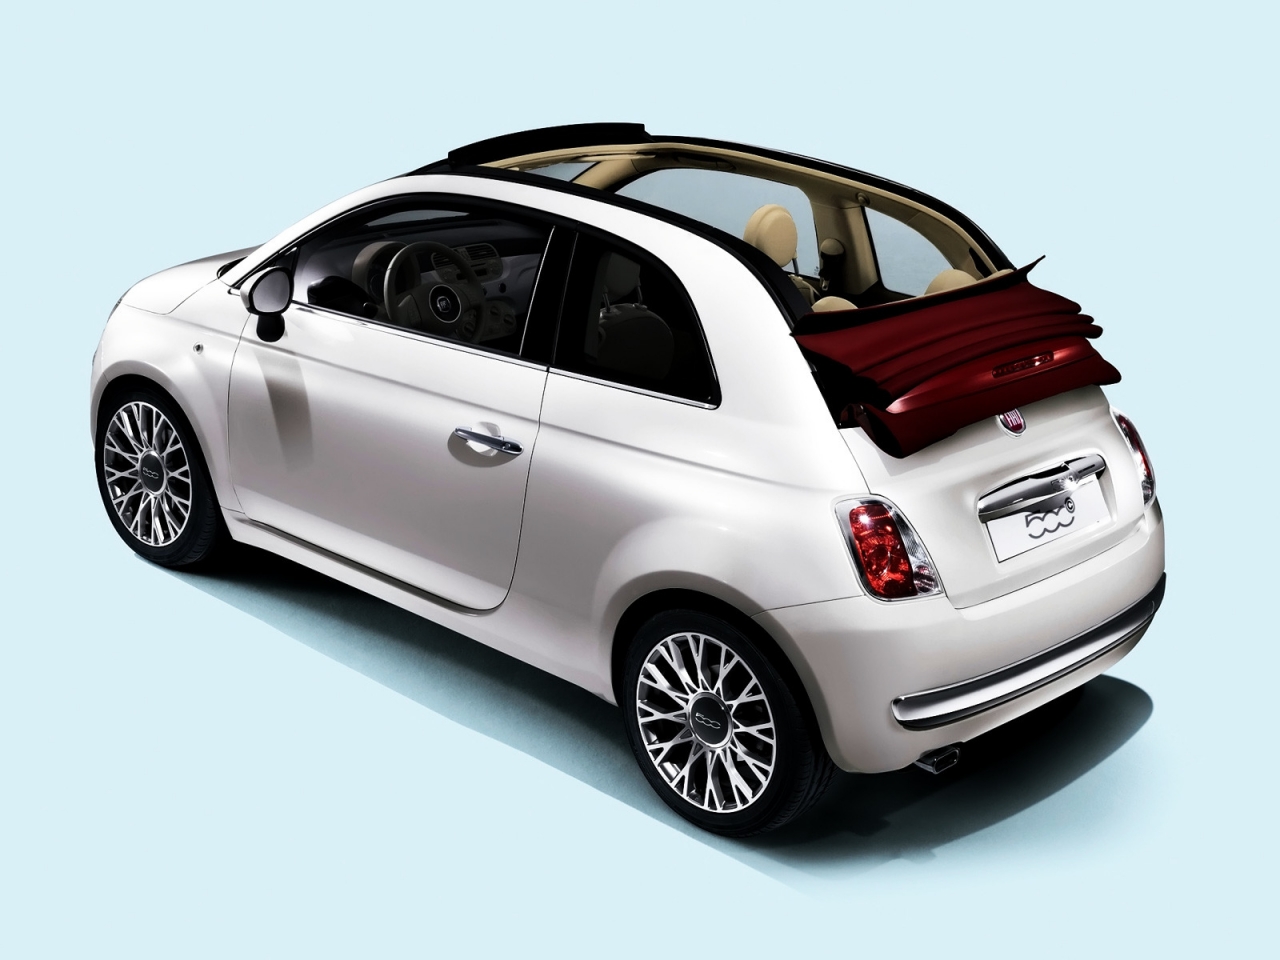 2009 Fiat 500C for 1280 x 960 resolution